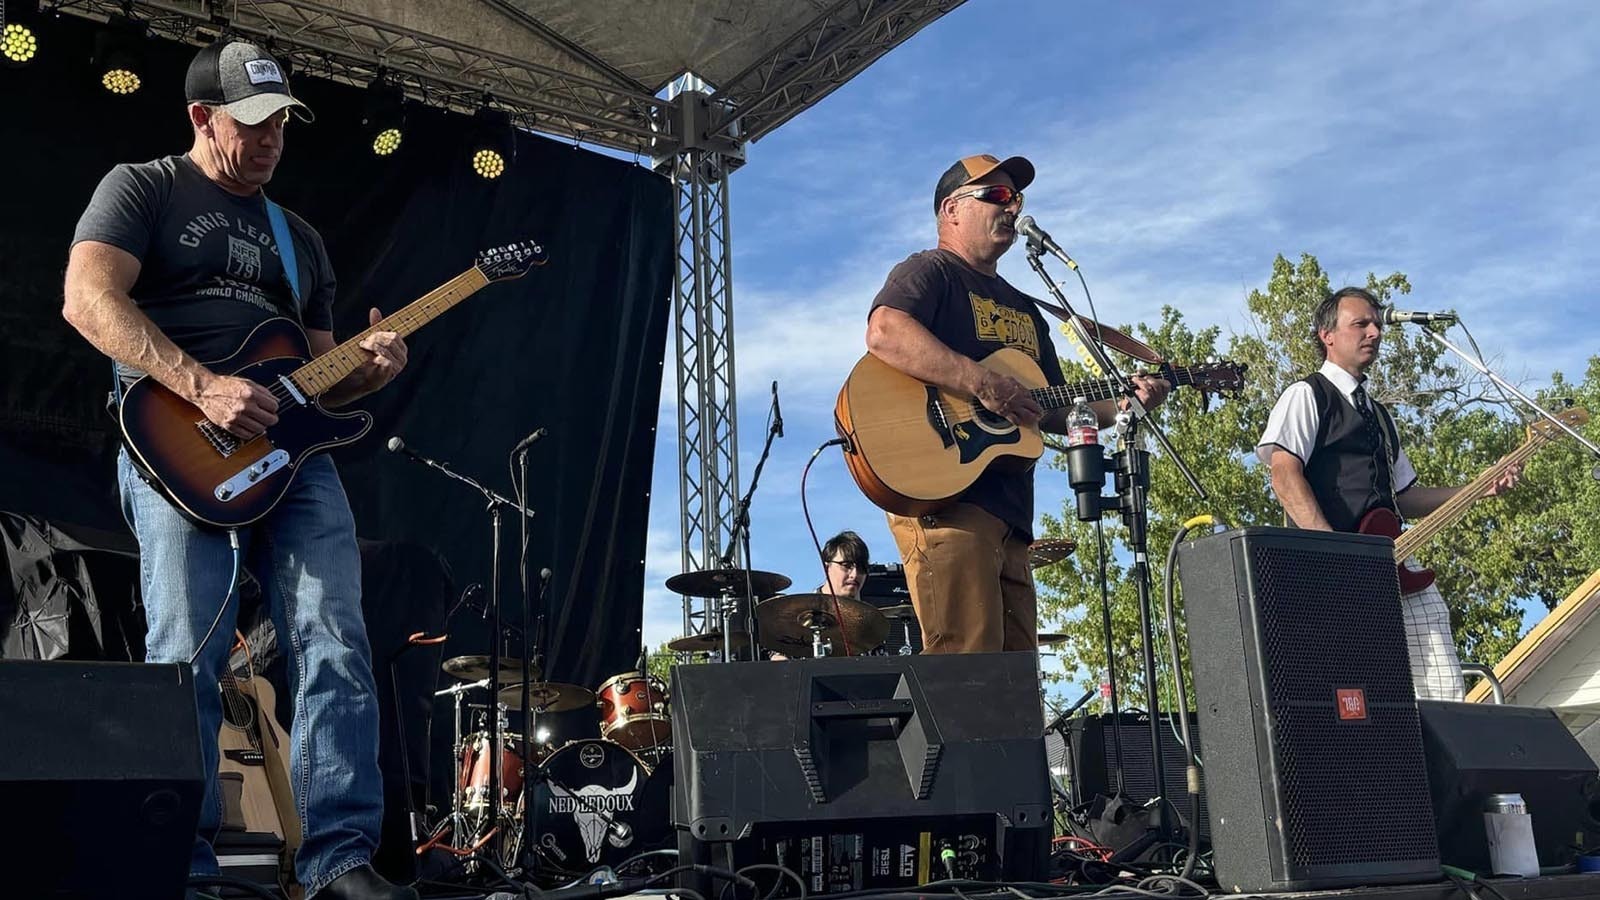 Patrick Stafford, center, and his band Full Tilt play Stafford’s tunes at Chris LeDoux Days in Kayee, Wyoming.